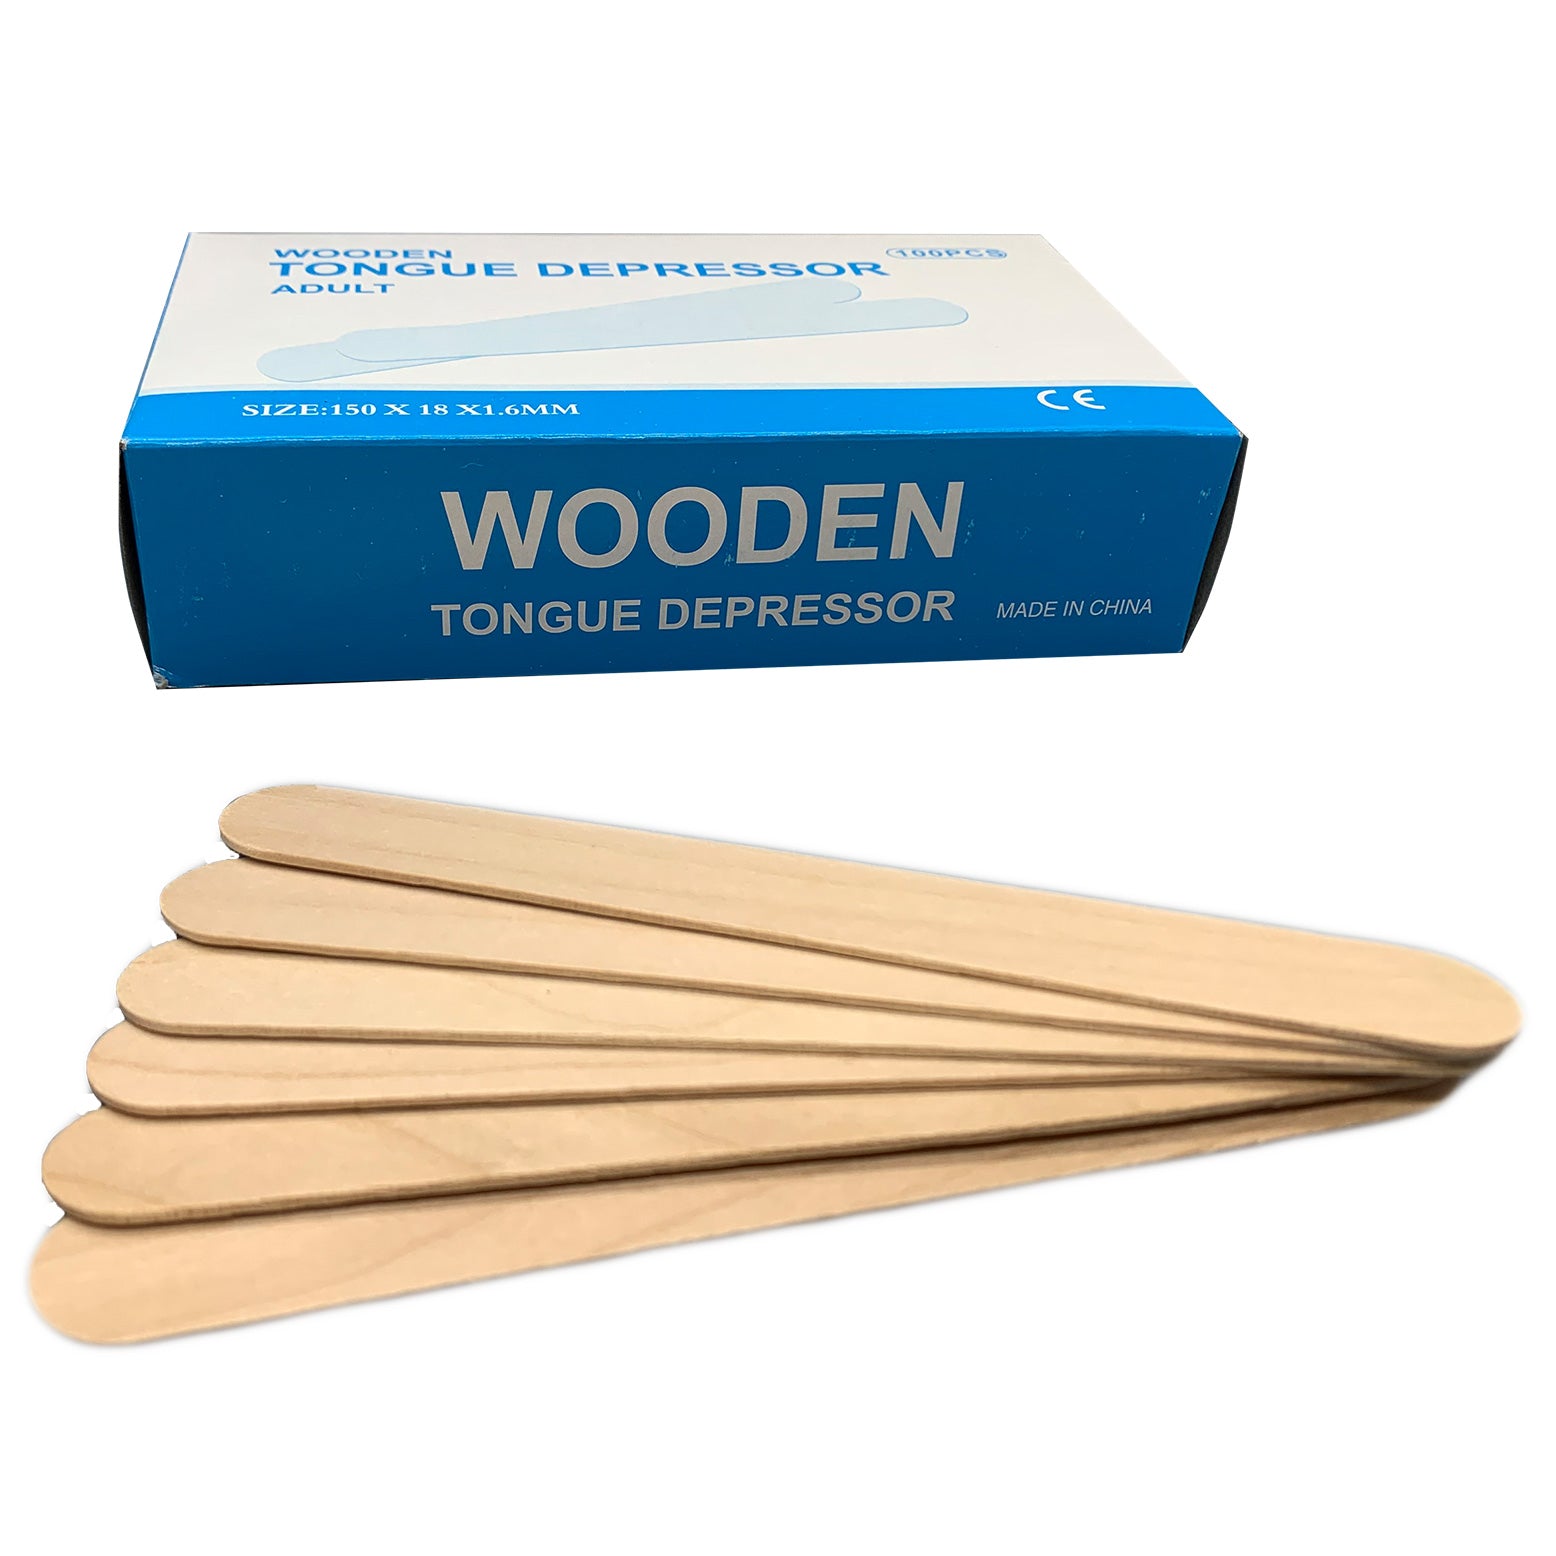  Tongue Depressors Non Sterile Non Splinter Chemical Free  Wooden 6 Inch High Grade Natural Birch By P&P MEDICAL SURGICAL Box Of 100